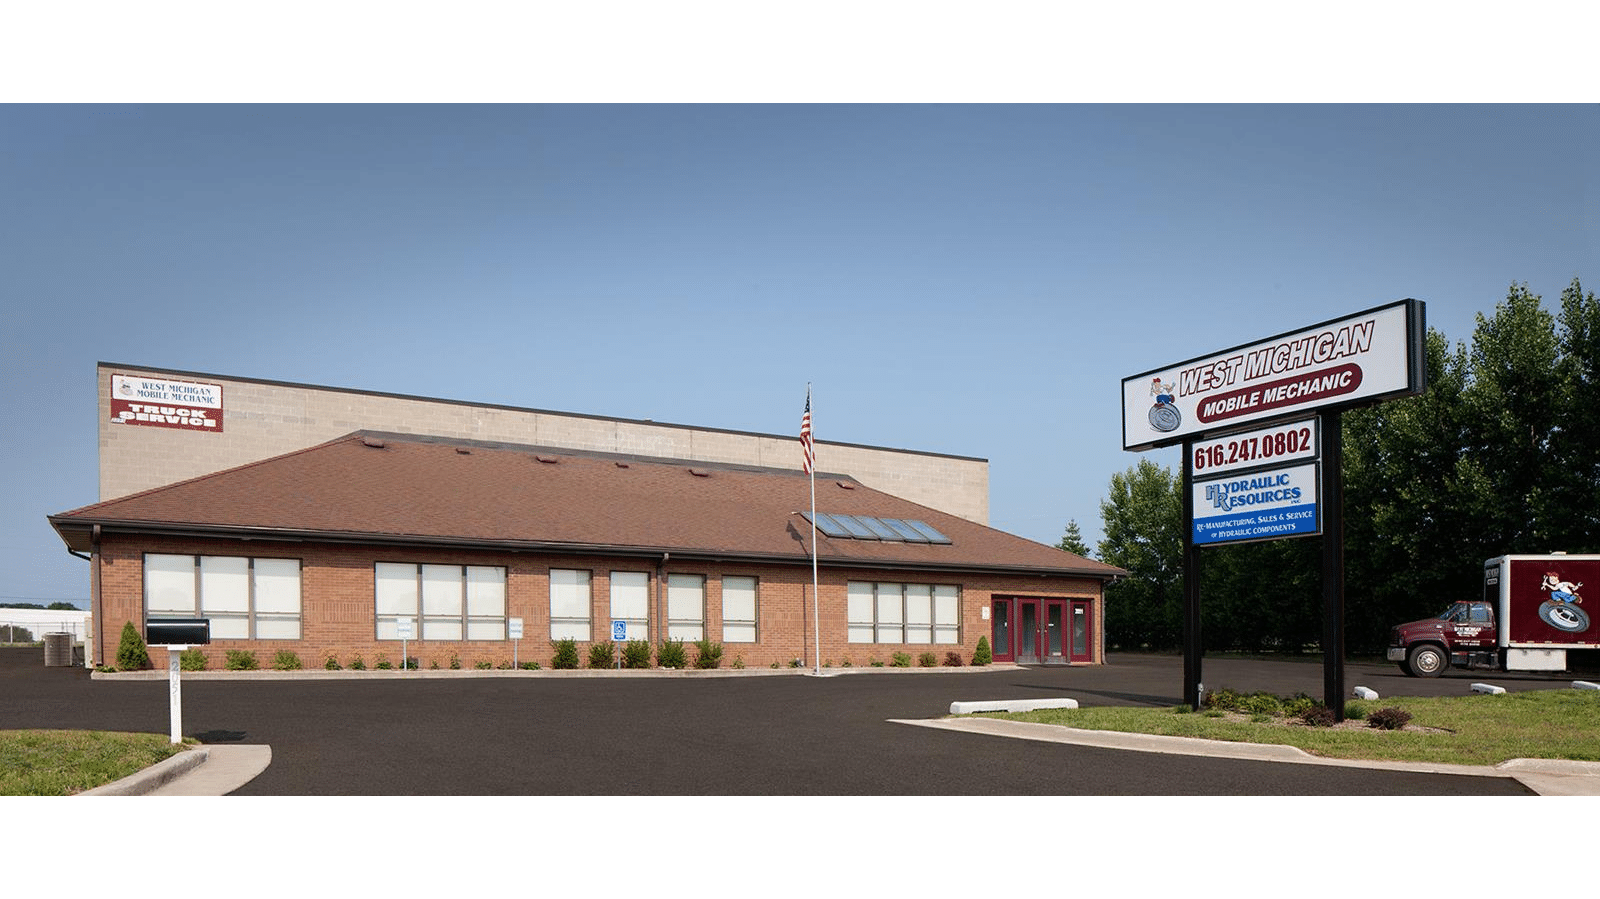 Services & Products West Michigan Mobile Mechanic in Wyoming MI